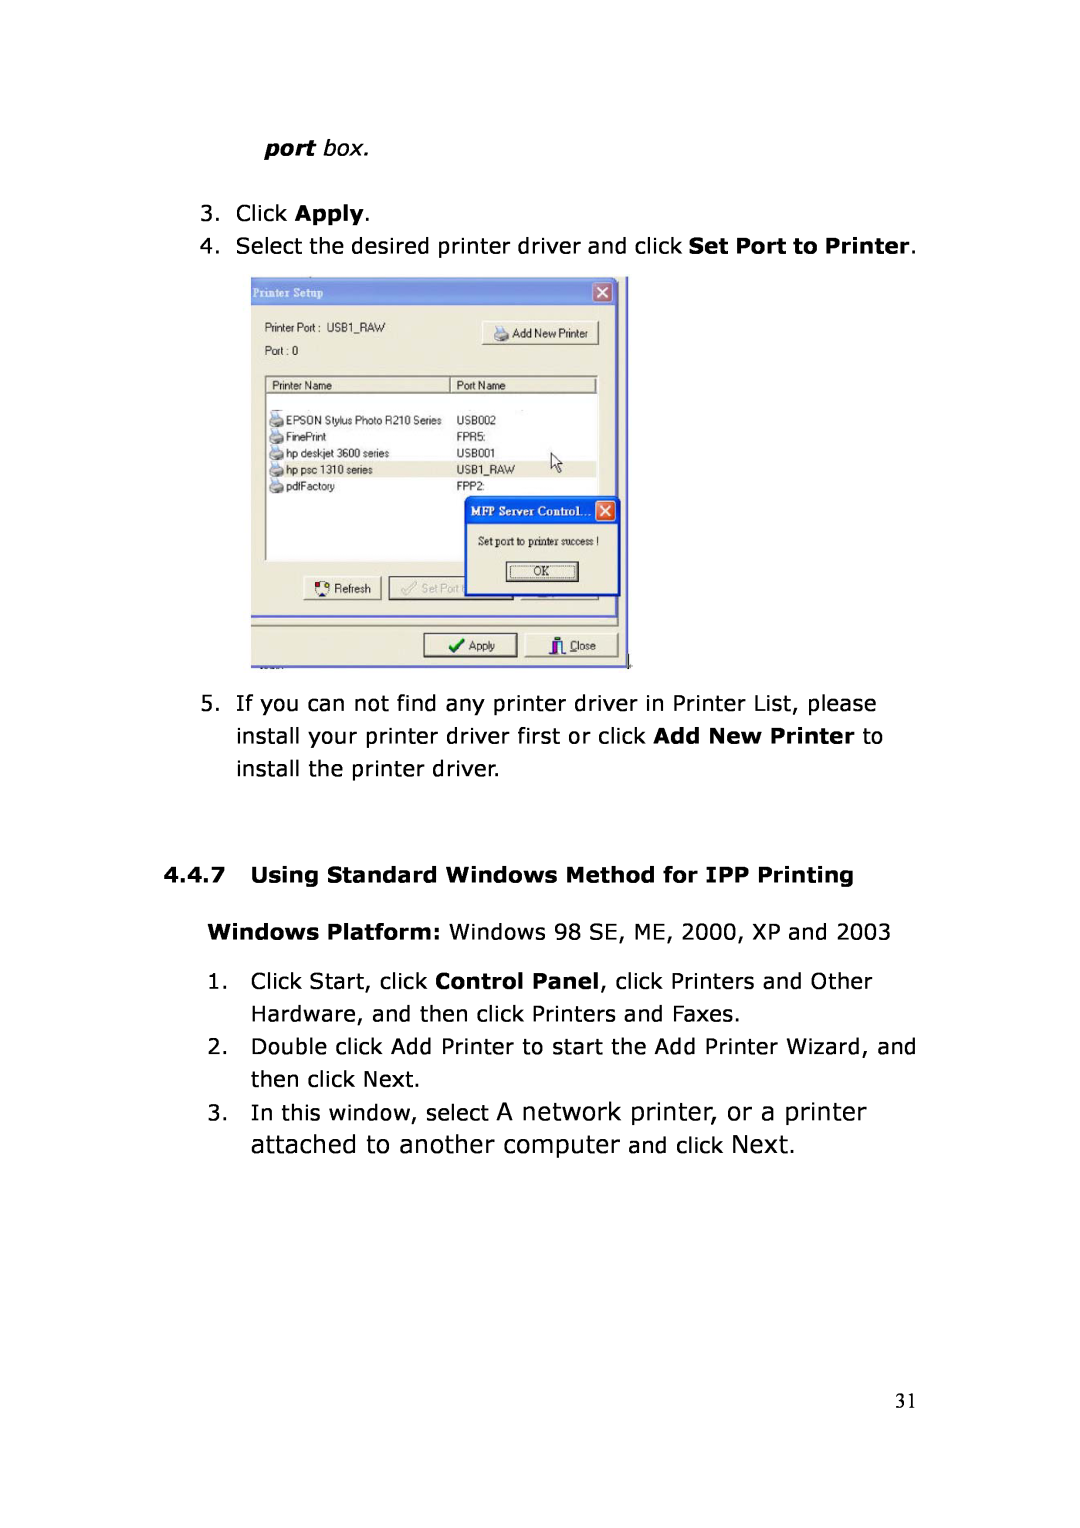 LevelOne FPS-3003 Using Standard Windows Method for IPP Printing, In this window, select A network printer, or a printer 